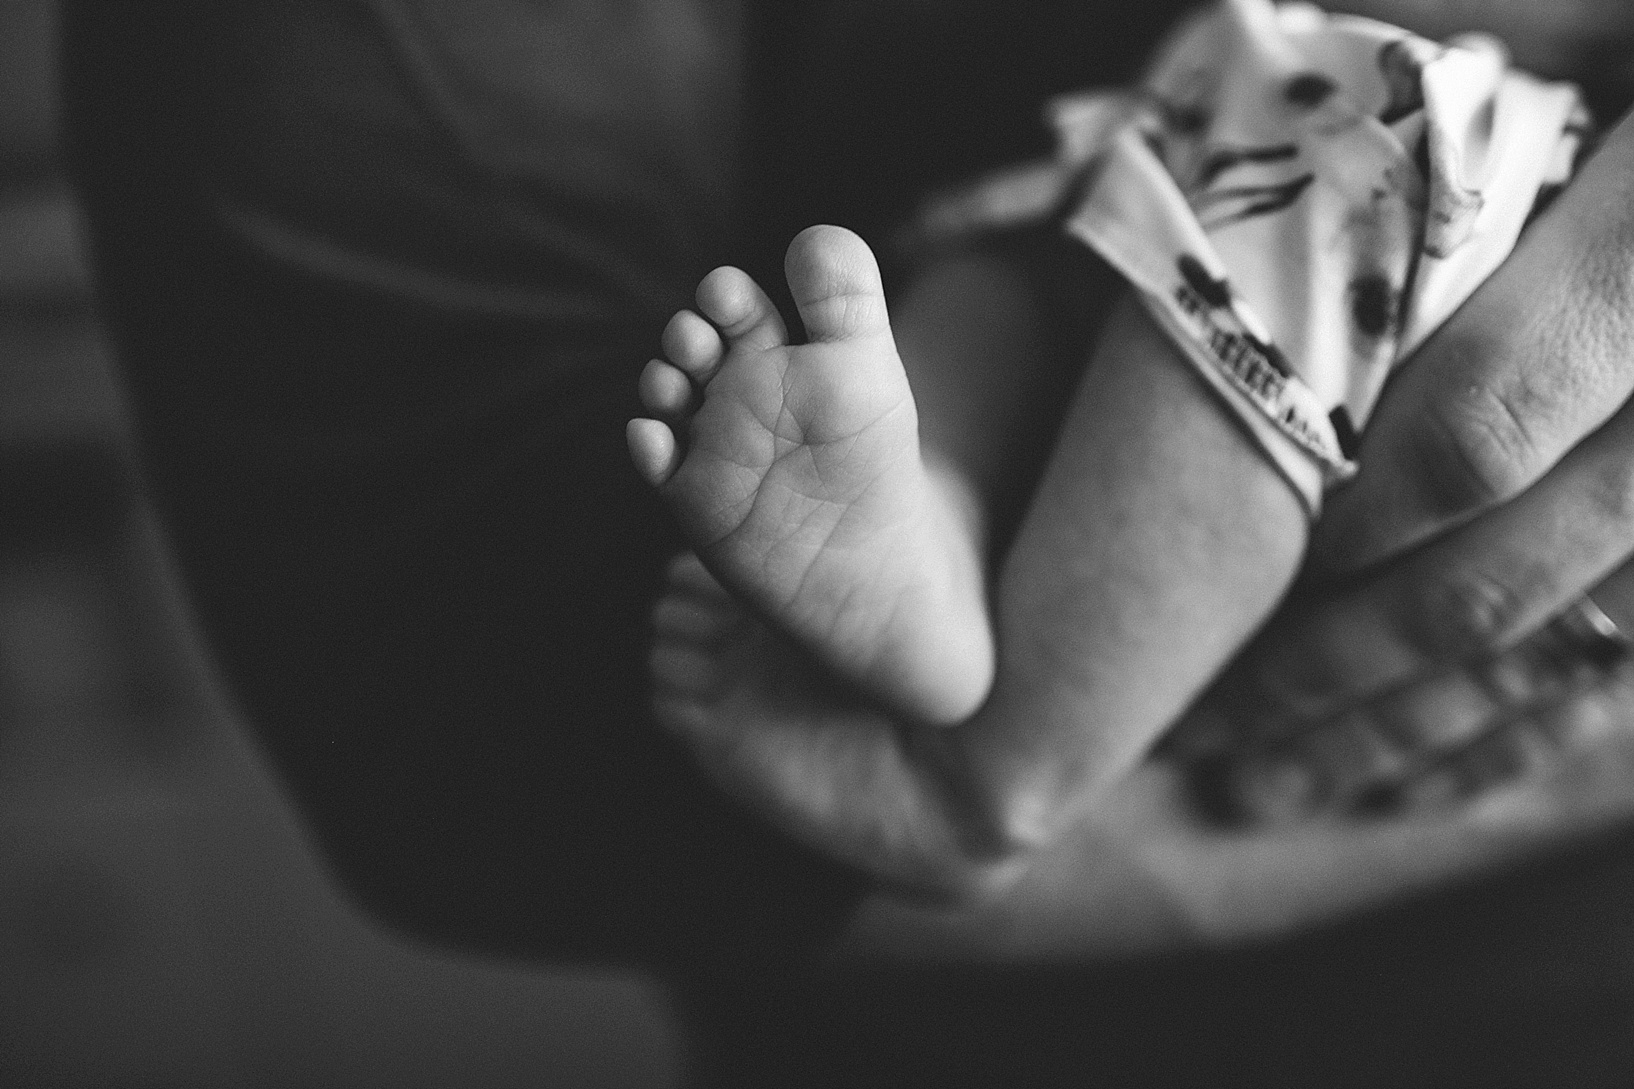 newborn baby feet held in father's arms